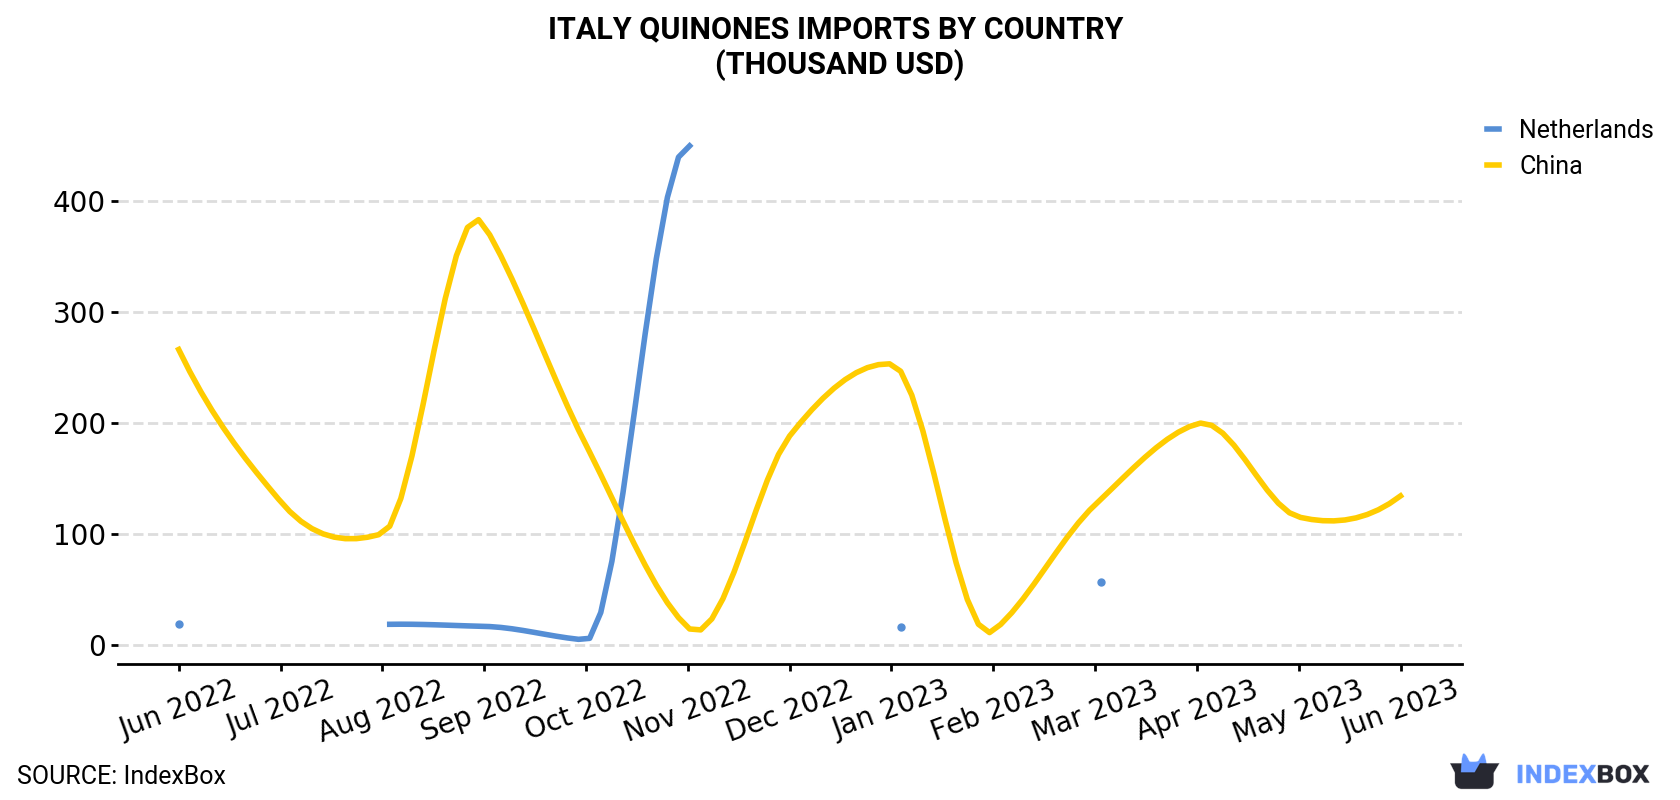 Italy Quinones Imports By Country (Thousand USD)